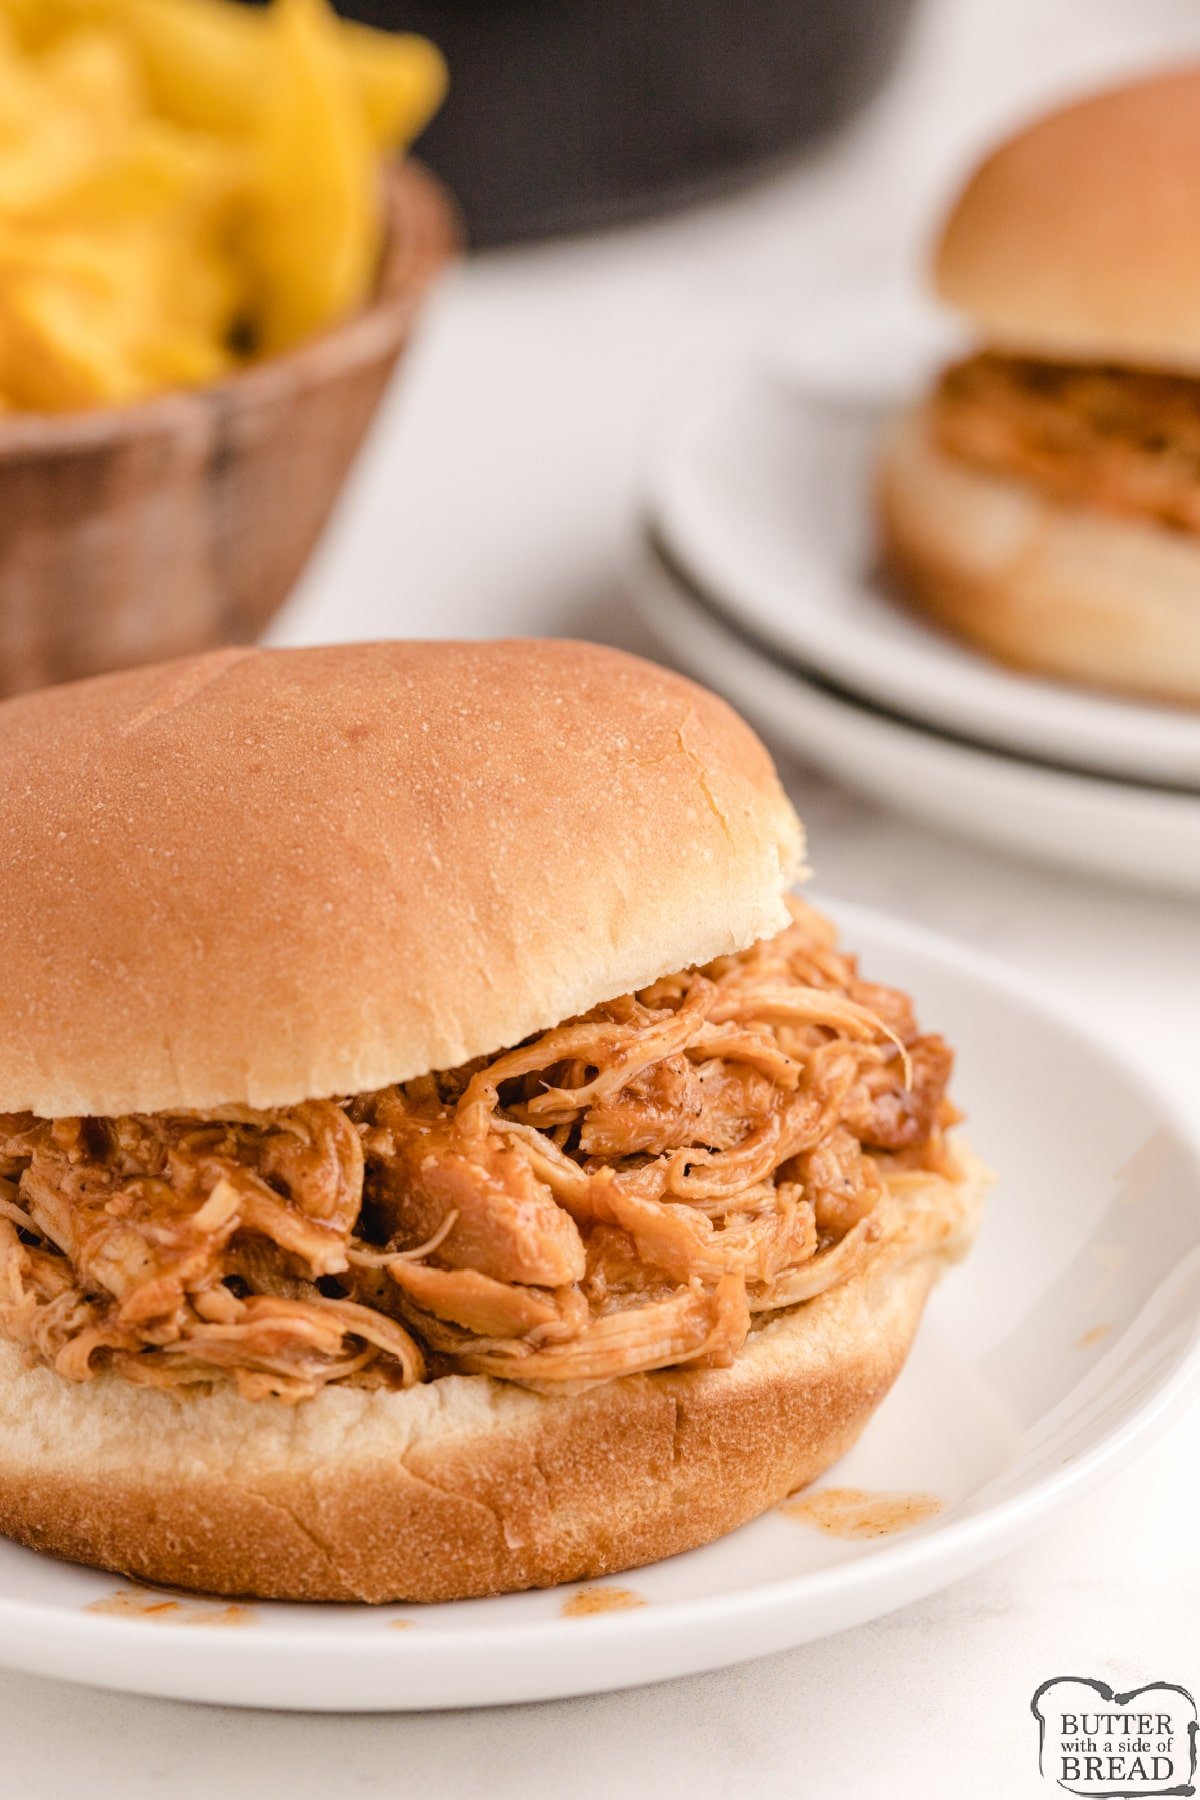 Slow Cooker Root Beer BBQ Chicken is made with chicken breasts, root beer and BBQ sauce - that's it! Tender, juicy barbecue chicken recipe that is perfect for sandwiches or served over rice. 